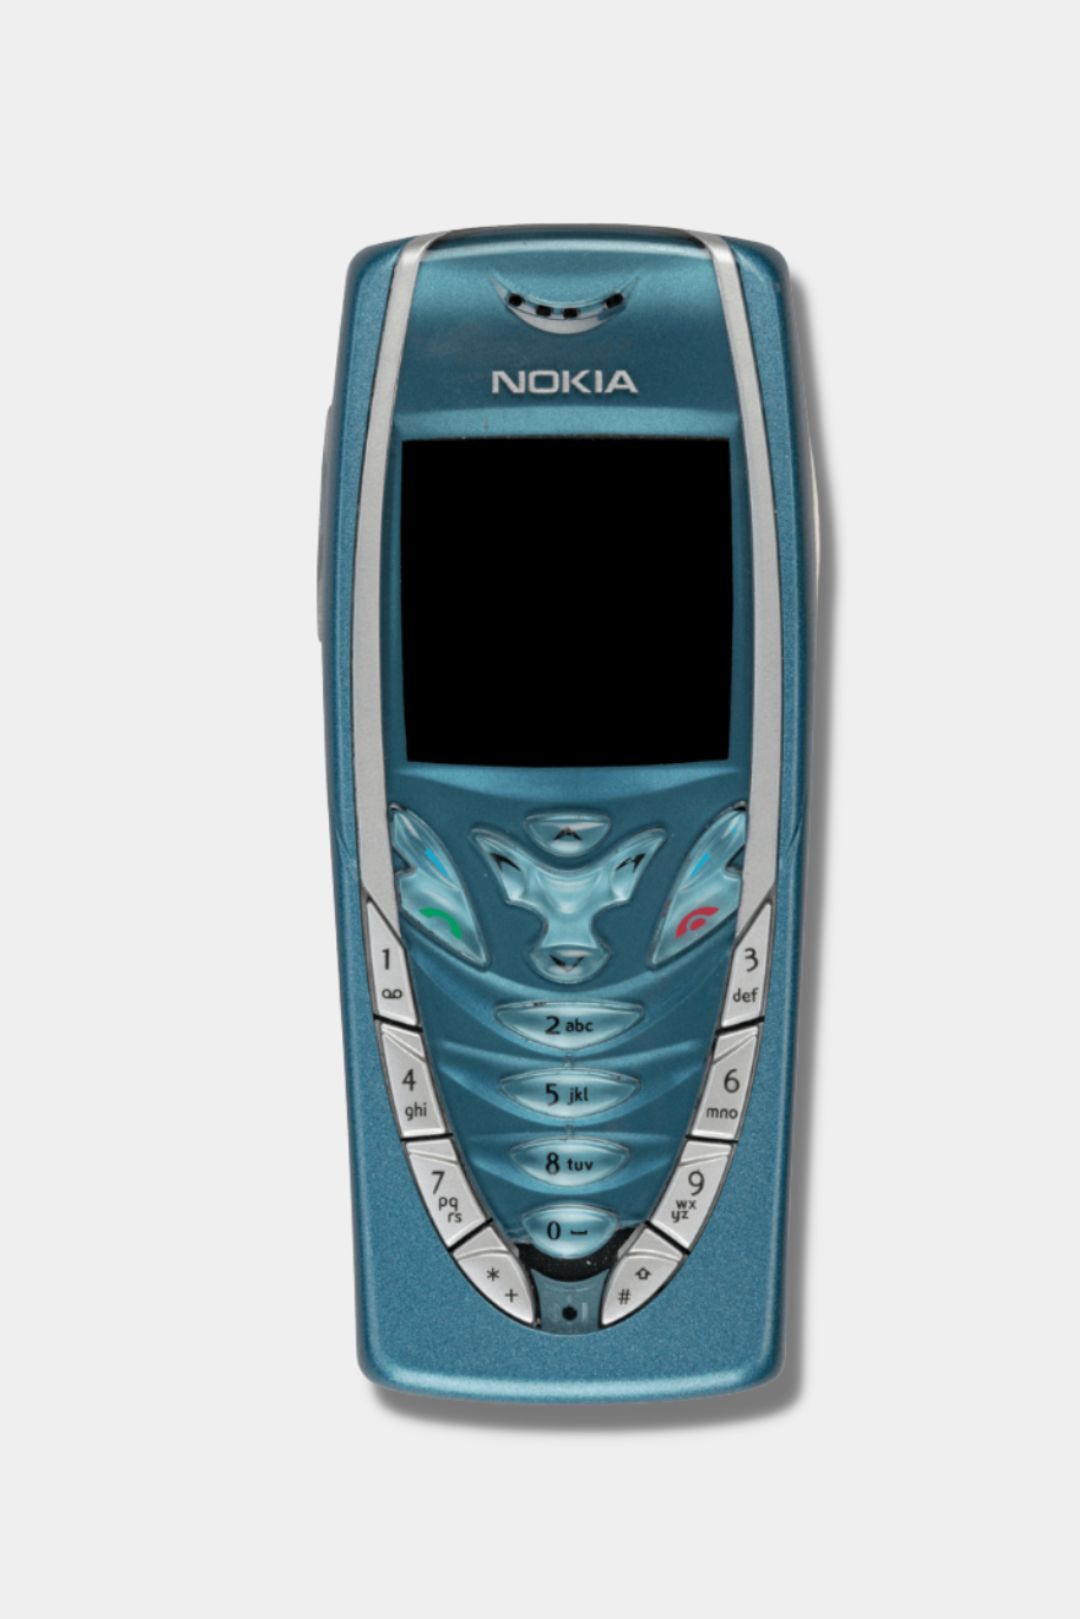 The Nokia 7210. A "fashion phone" that actually deserved this moniker. Beautifully designed, yet ...